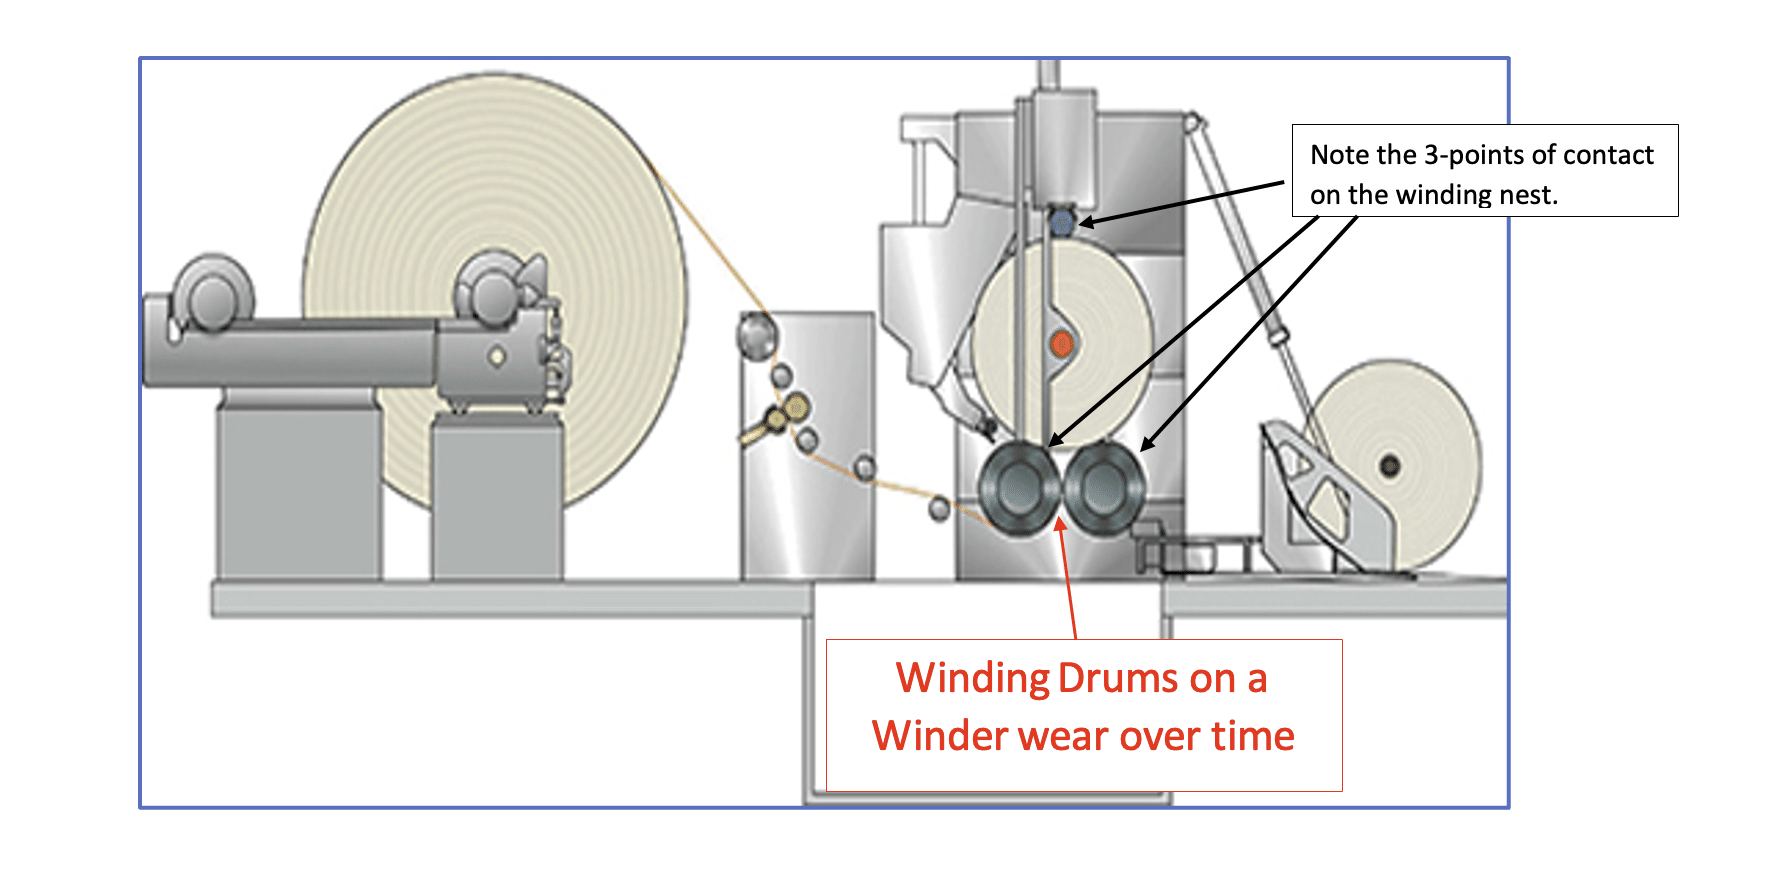 Winding Drums on a Winder wear over time from Pulmac